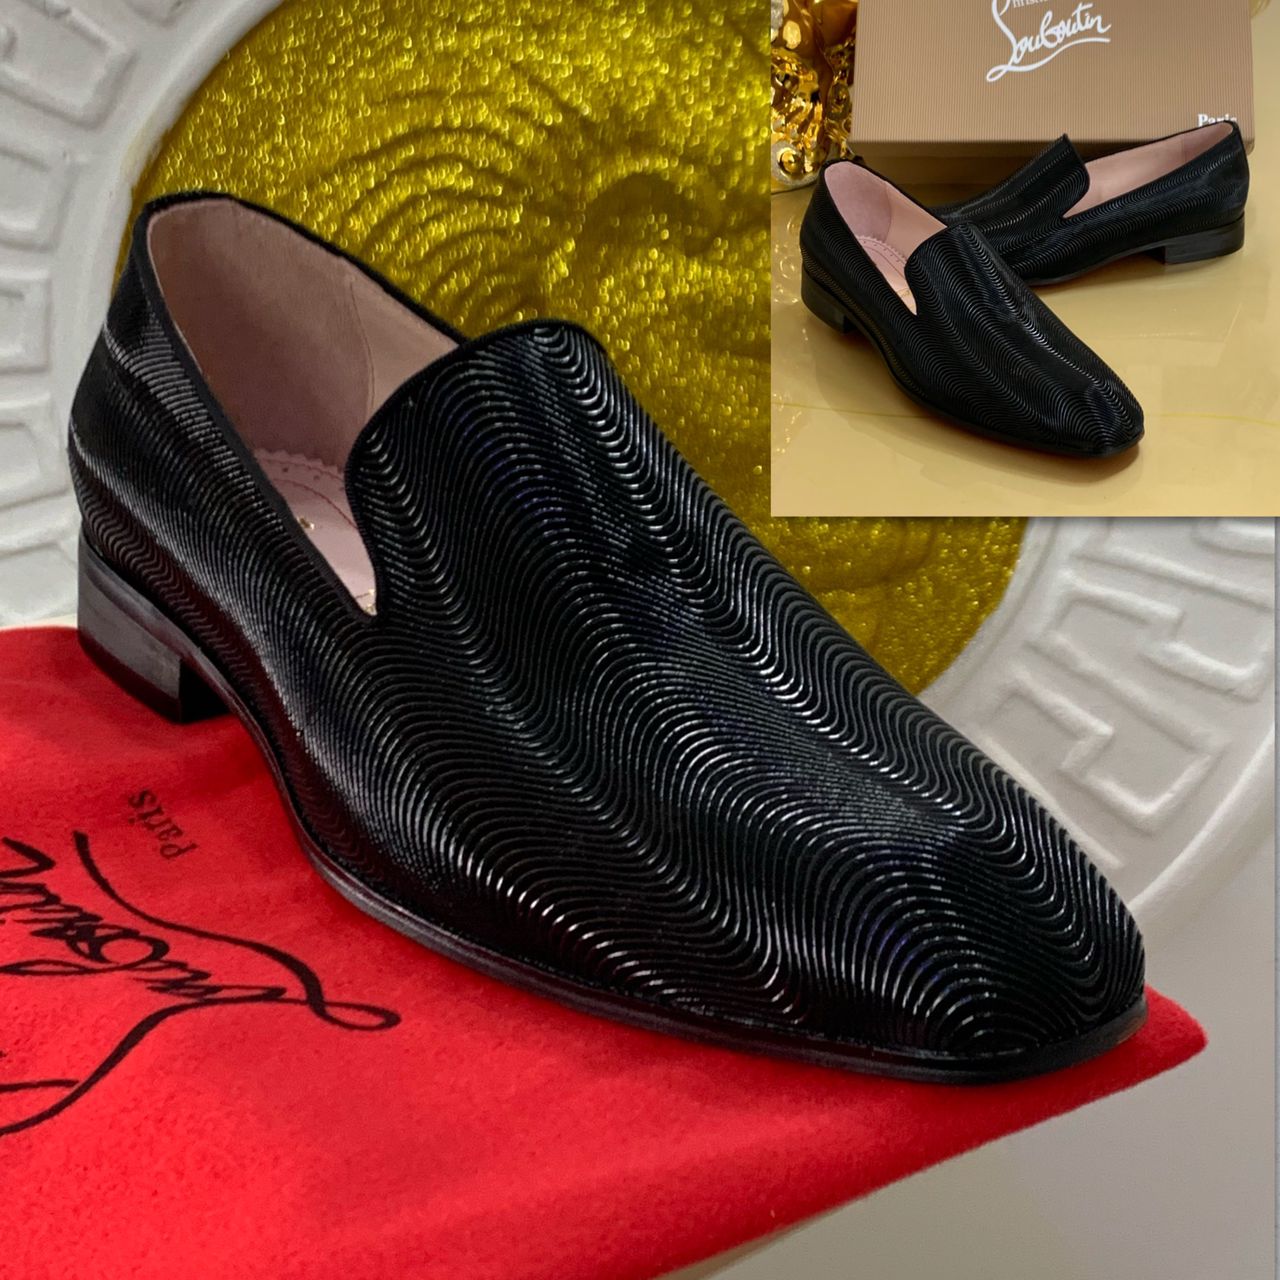 CLASSIC PATTERNED DESIGNER LEATHER LOAFERS